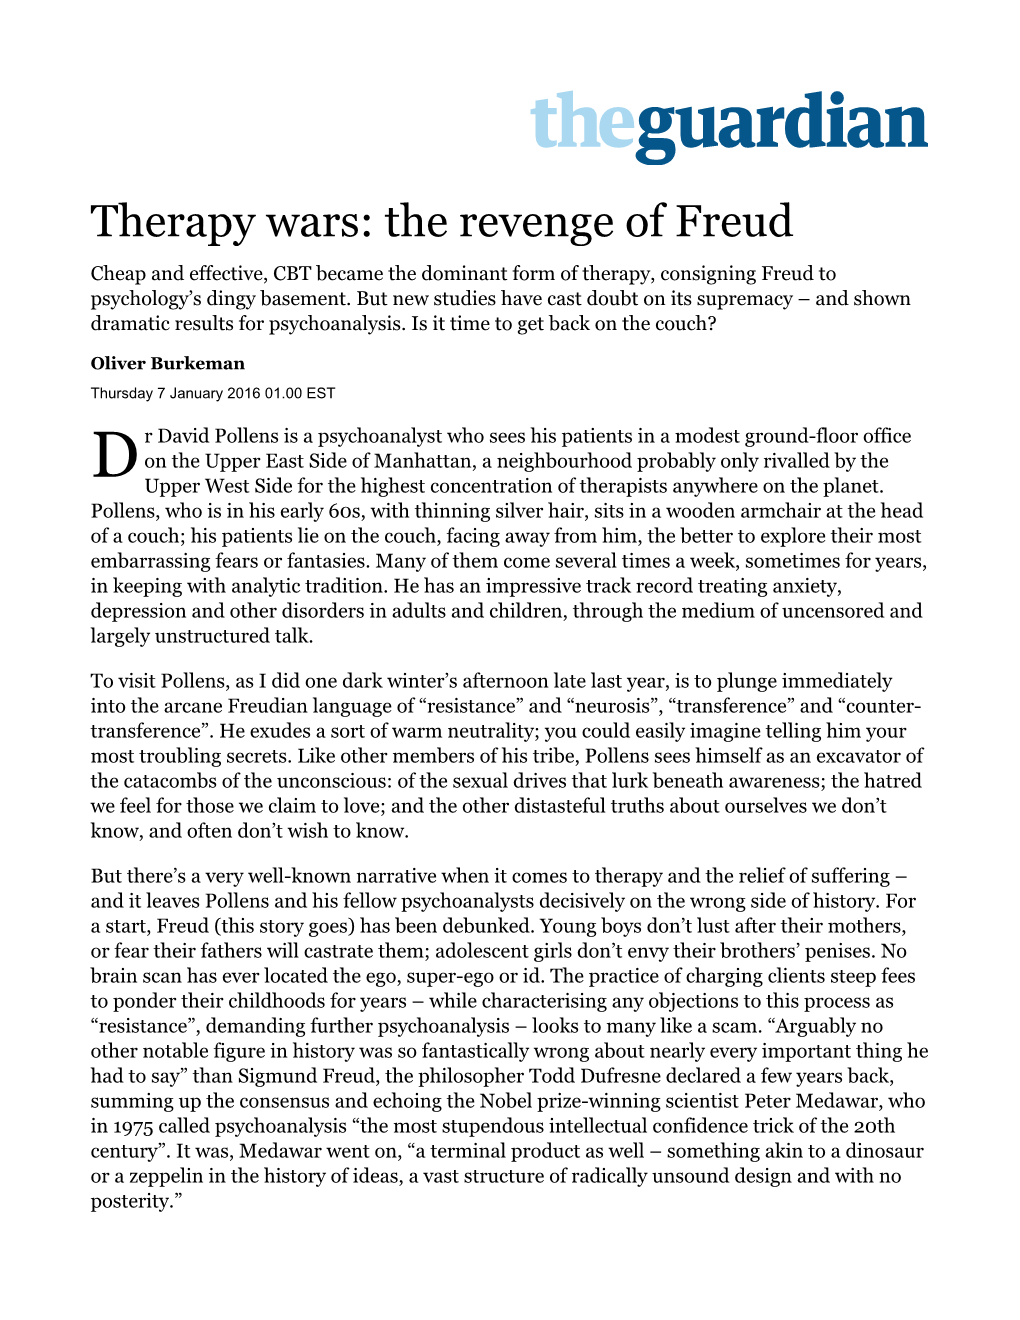 Therapy Wars: the Revenge of Freud | Oliver Burkeman | Science